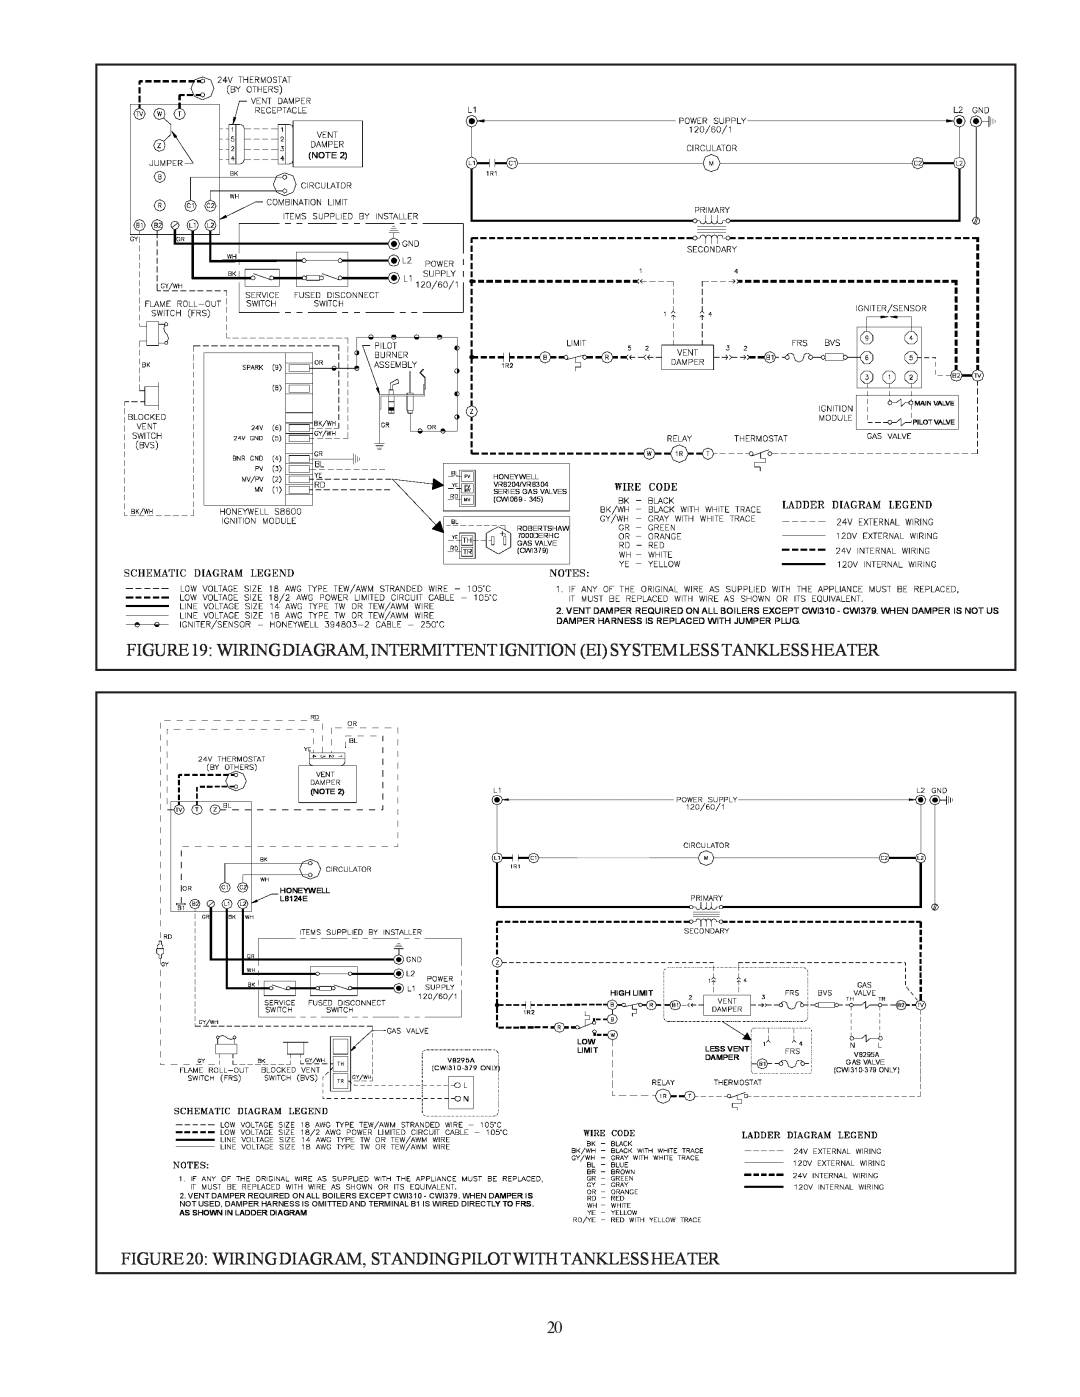 Crown Boiler CWI138, CWI172, CWI345, CWI310, CWI103, CWI276, CWI Series Wiring Diagram, Standing Pilot With Tankless Heater 